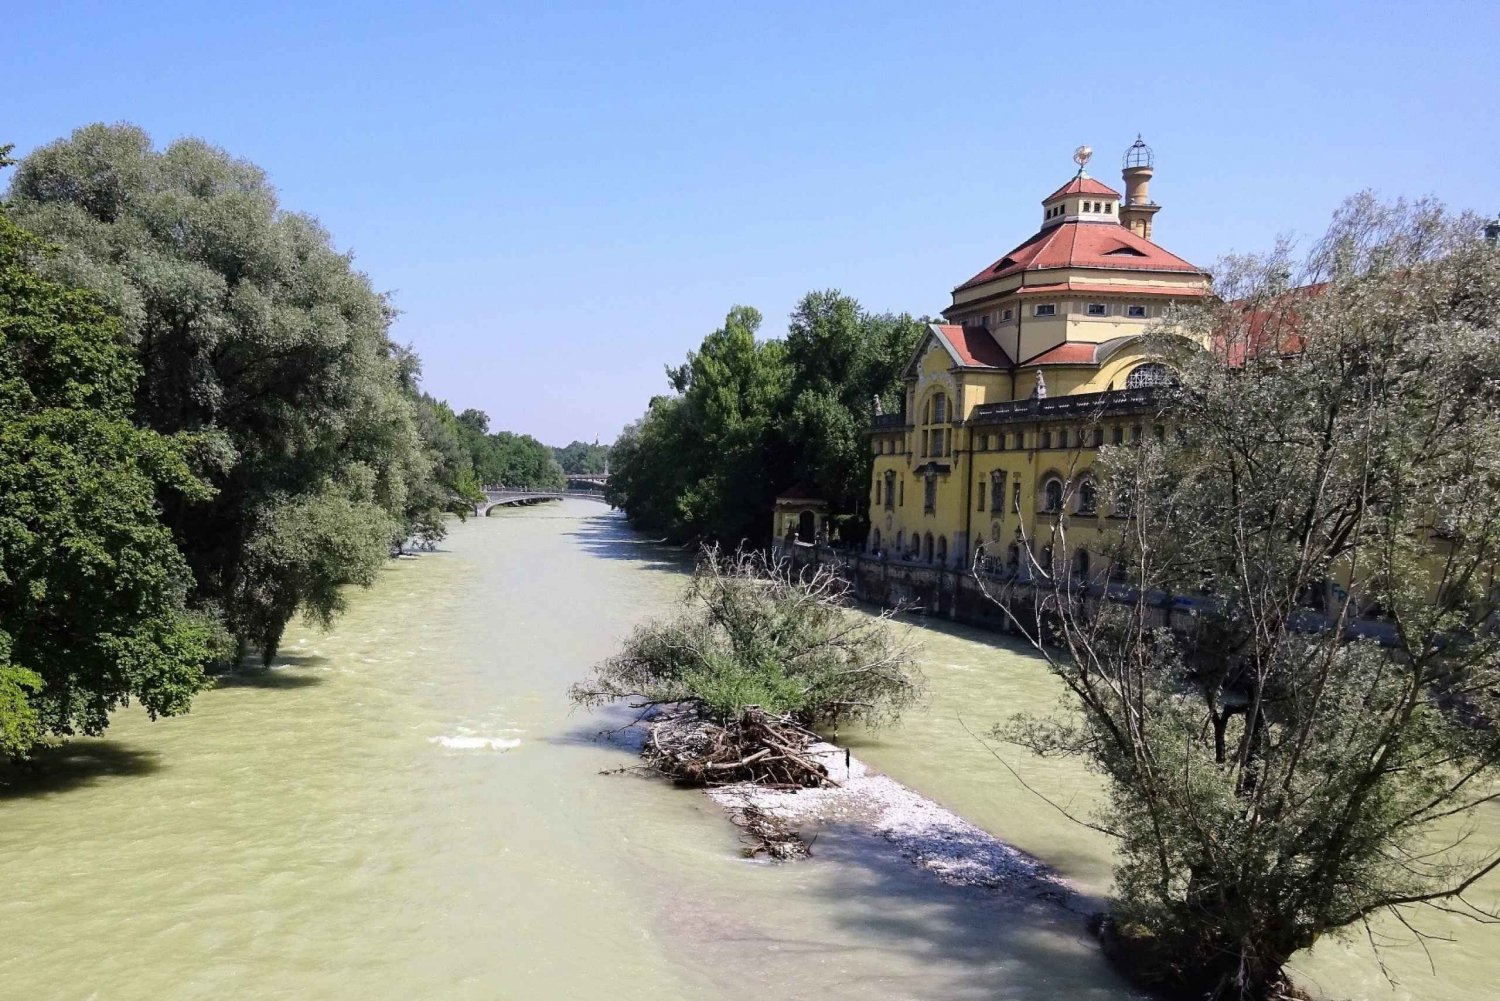 Take-a-Boat-Cruise-on-the-Isar-River